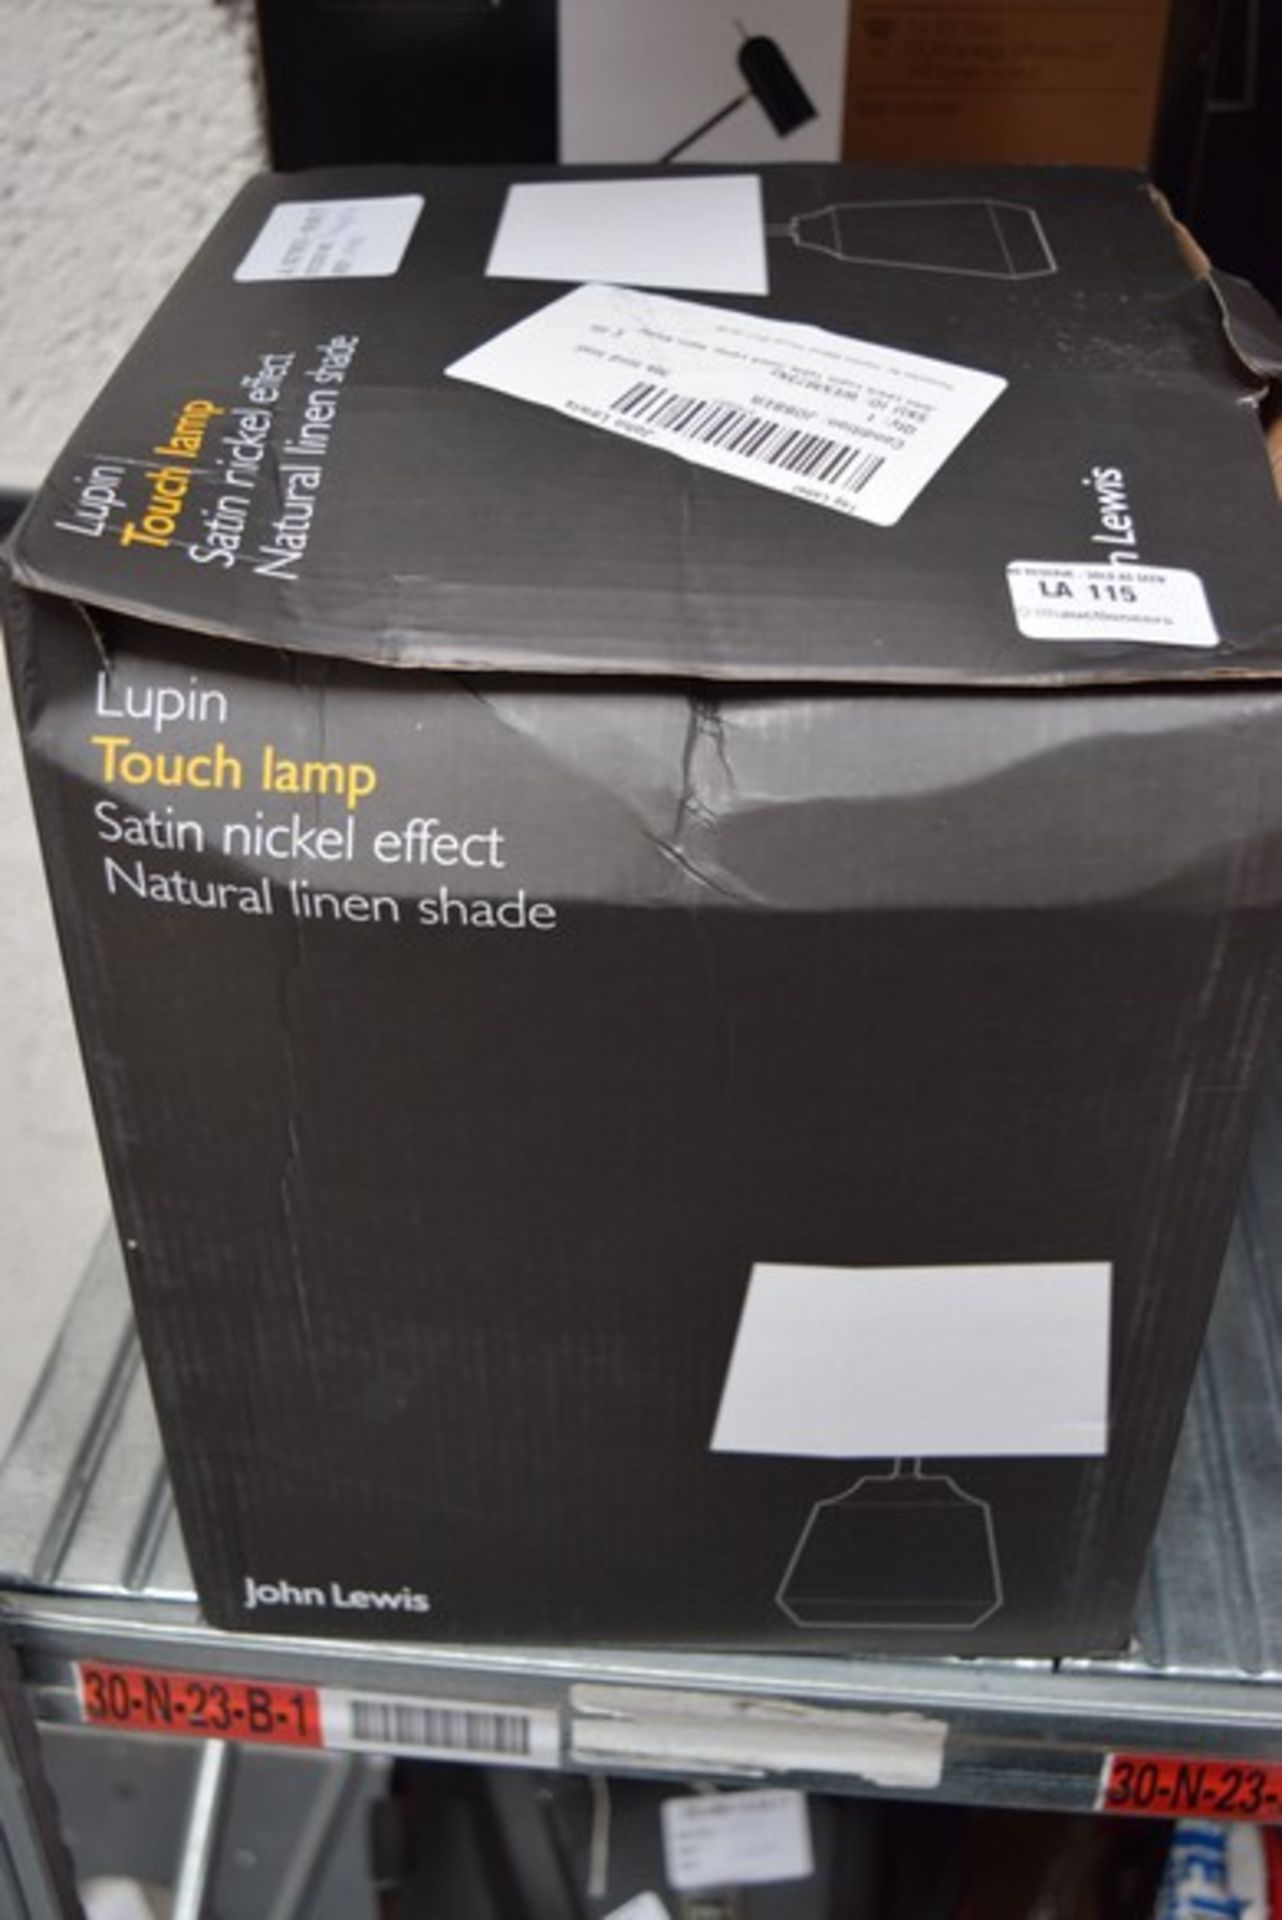 1 x BOXED LUPIN TOUCH LAMP WITH SATIN NICKEL FINISH RRP £45 09.08.17 (7060314) *PLEASE NOTE THAT THE